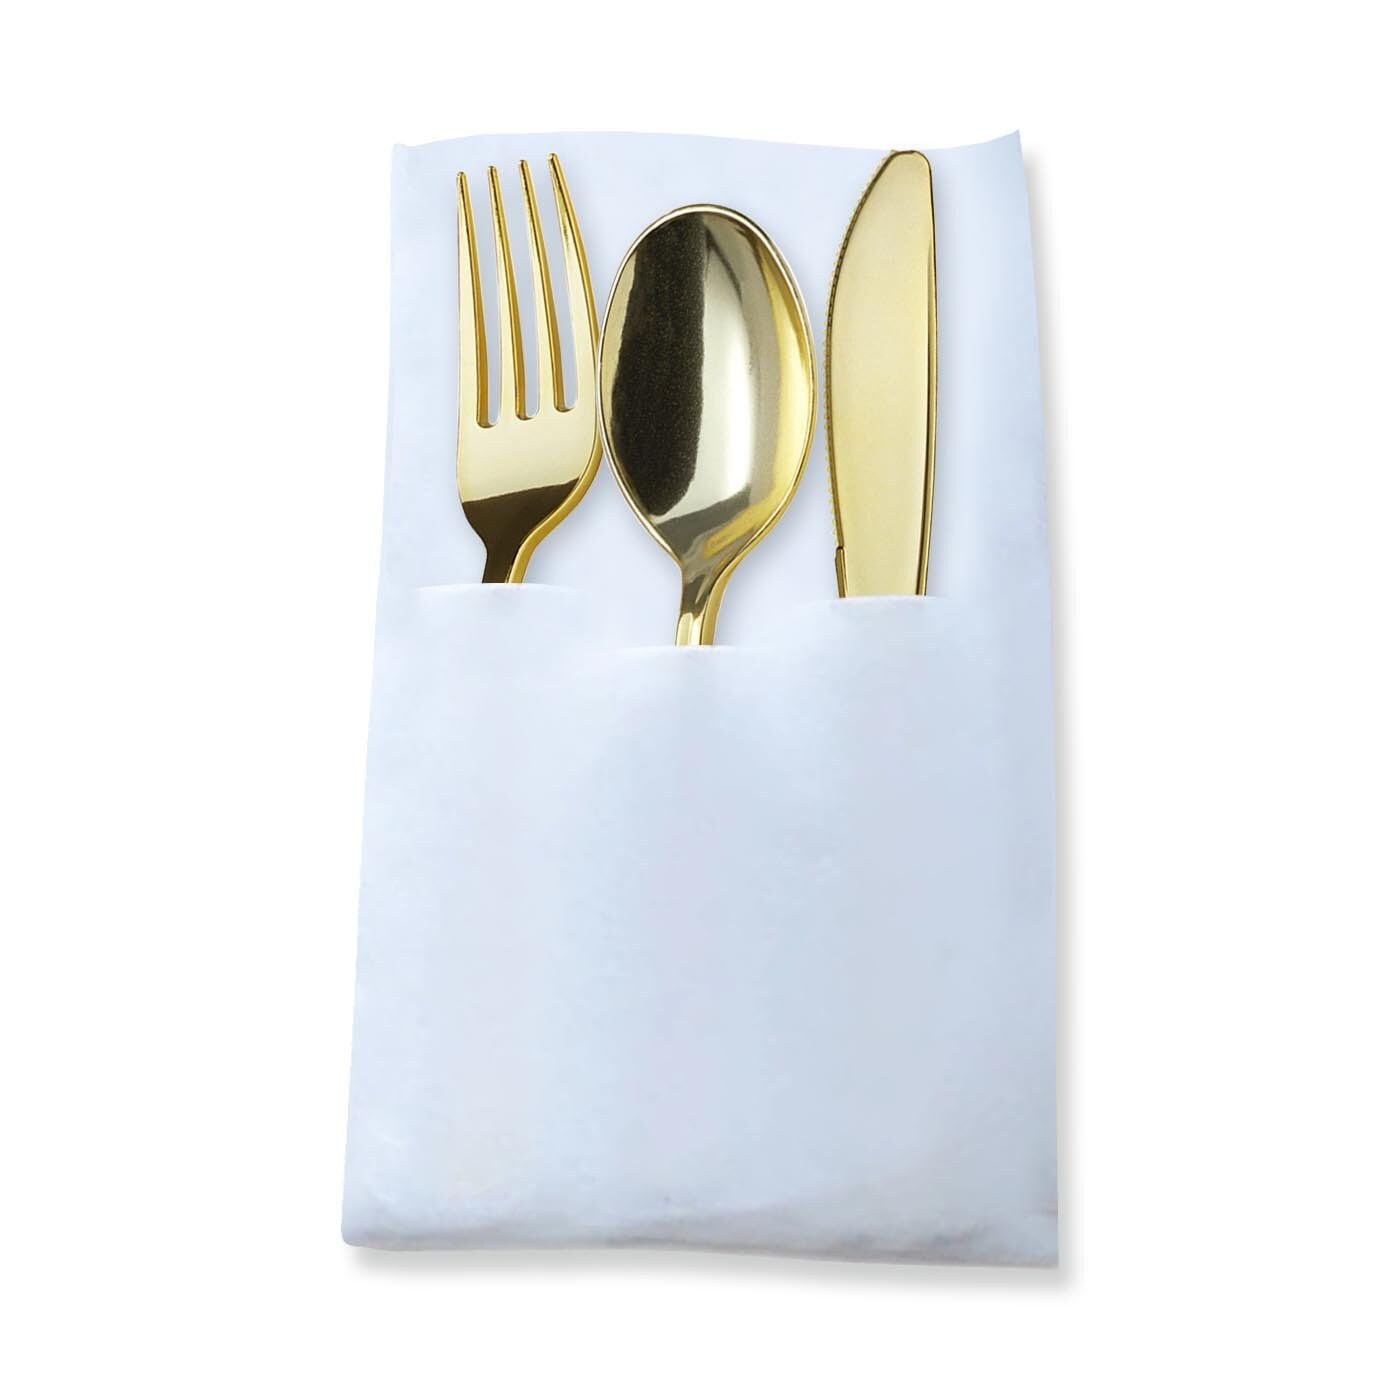 Gold Plastic Cutlery White Pocket Napkin Set (70 Guests)